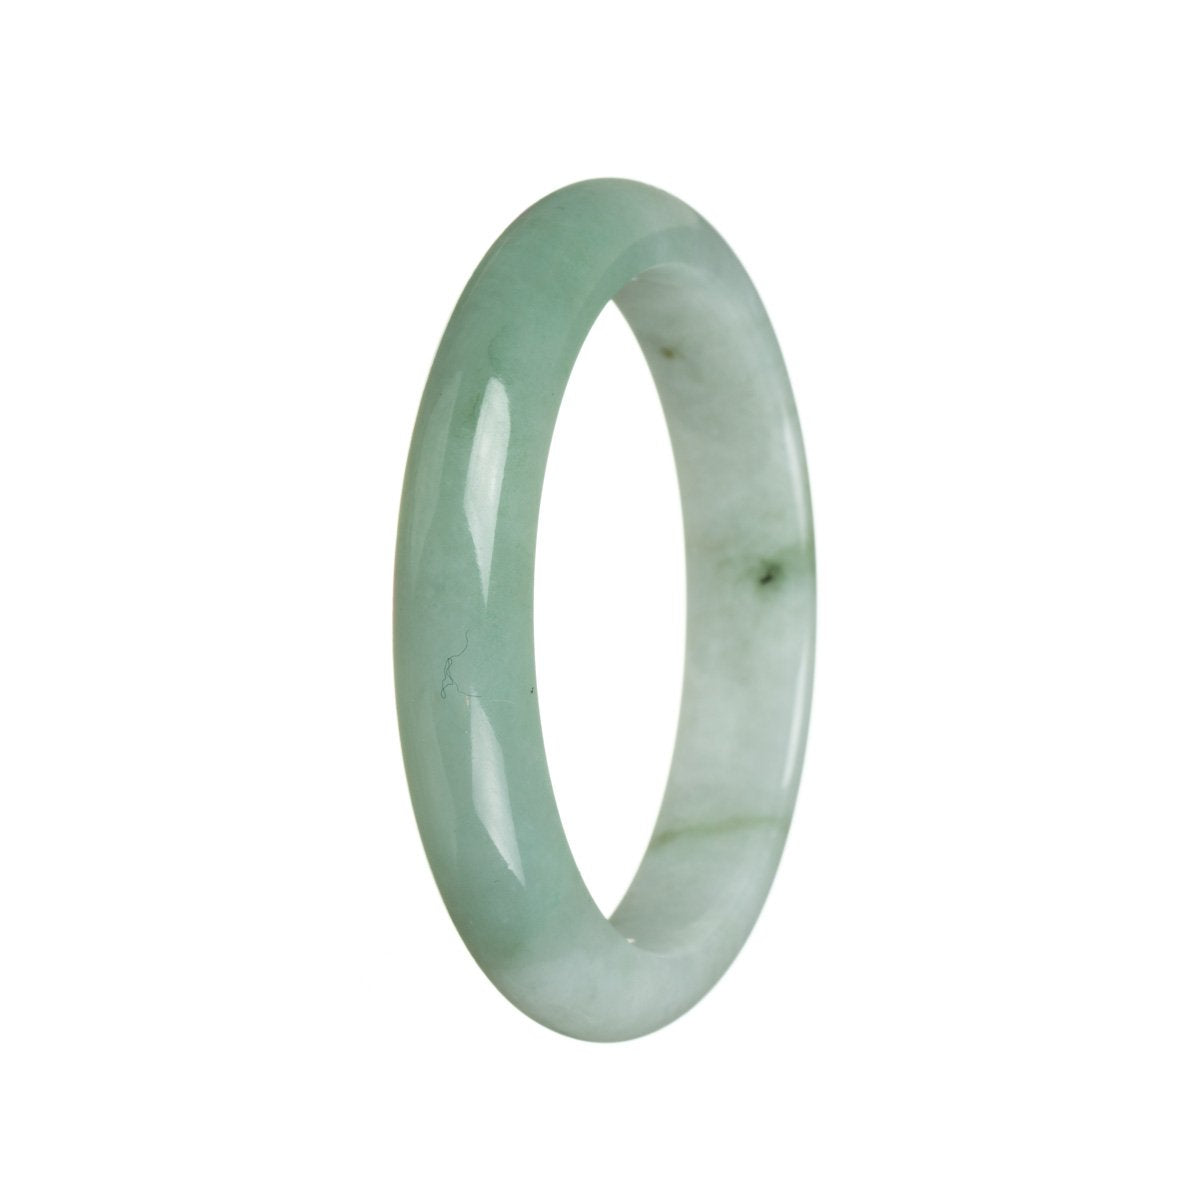 A beautiful, high-quality green jadeite bangle with a semi-round shape, measuring 55mm. Perfect for adding a touch of elegance to any outfit.